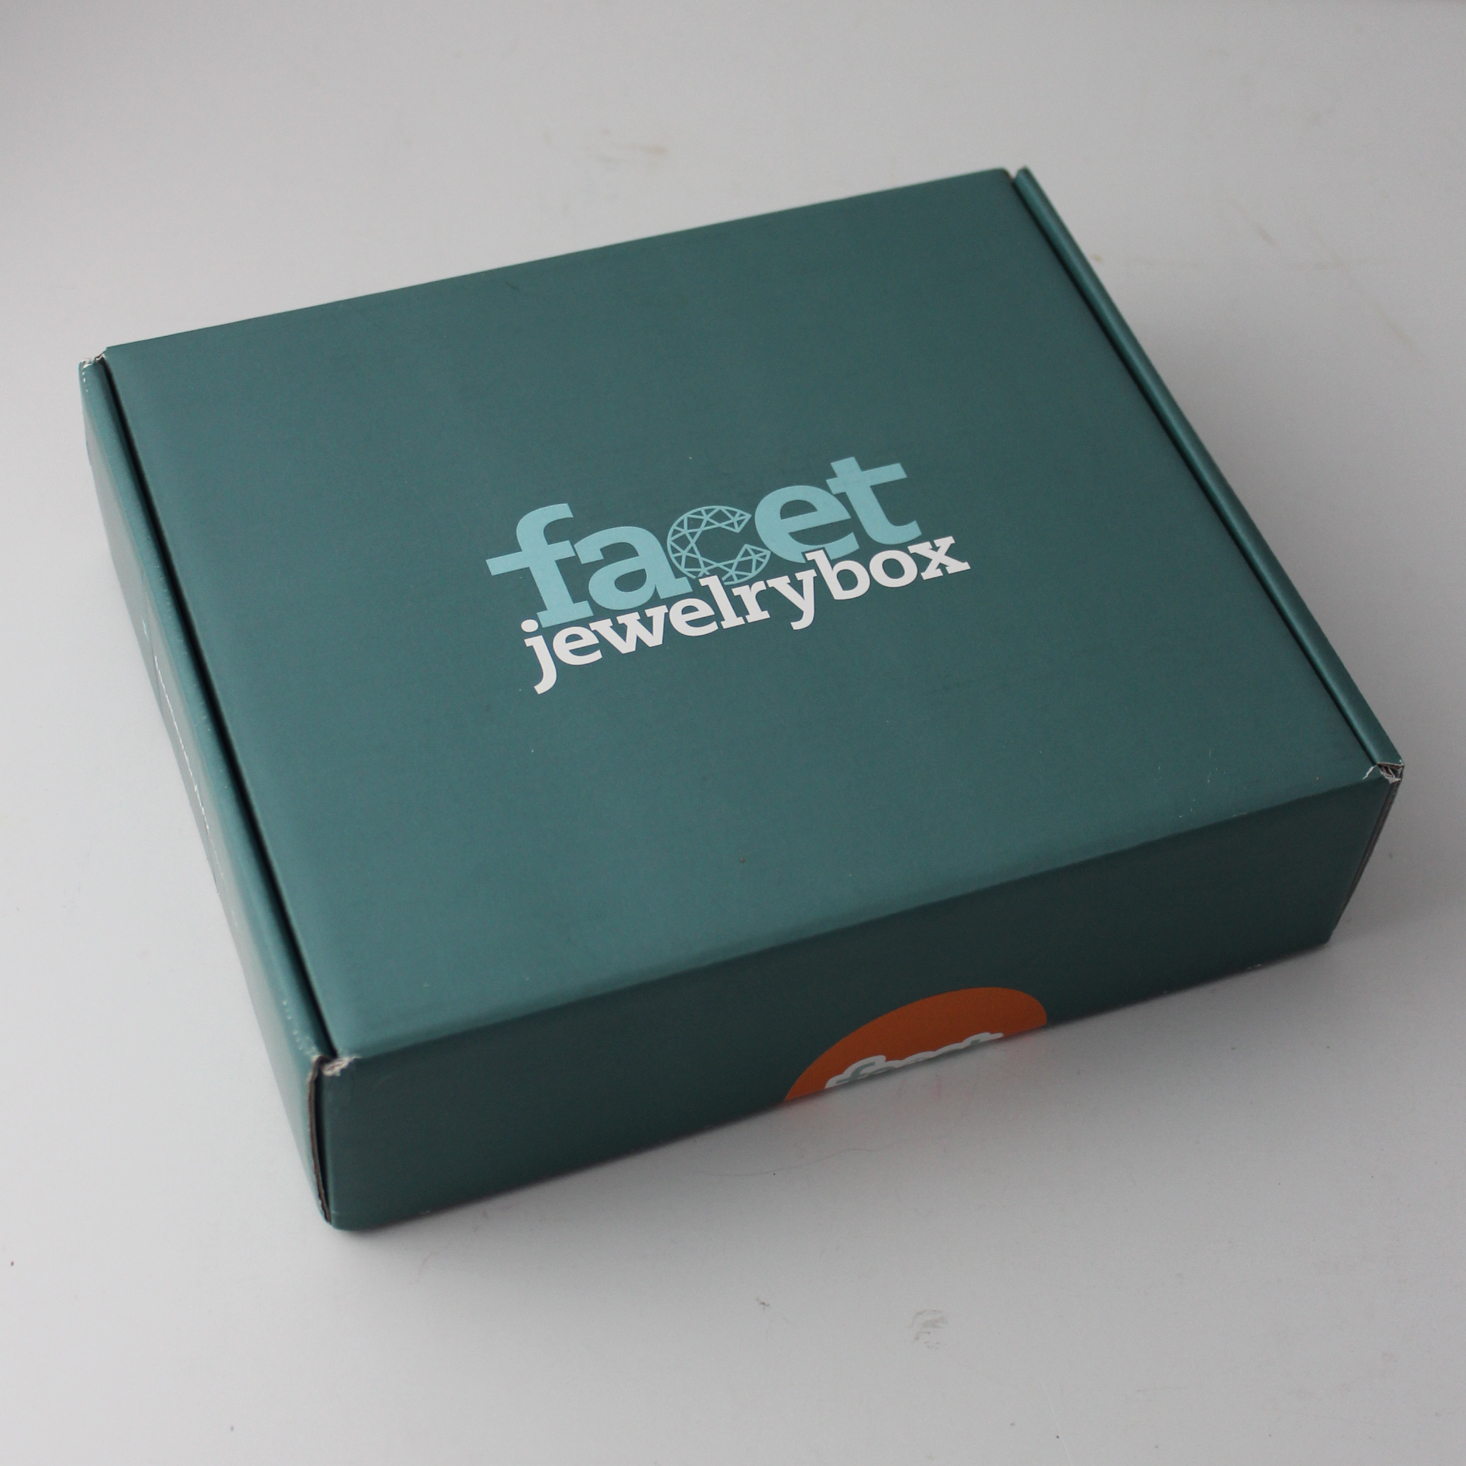 Facet Jewelry Box Bead Stitching Review + Coupon – December 2018